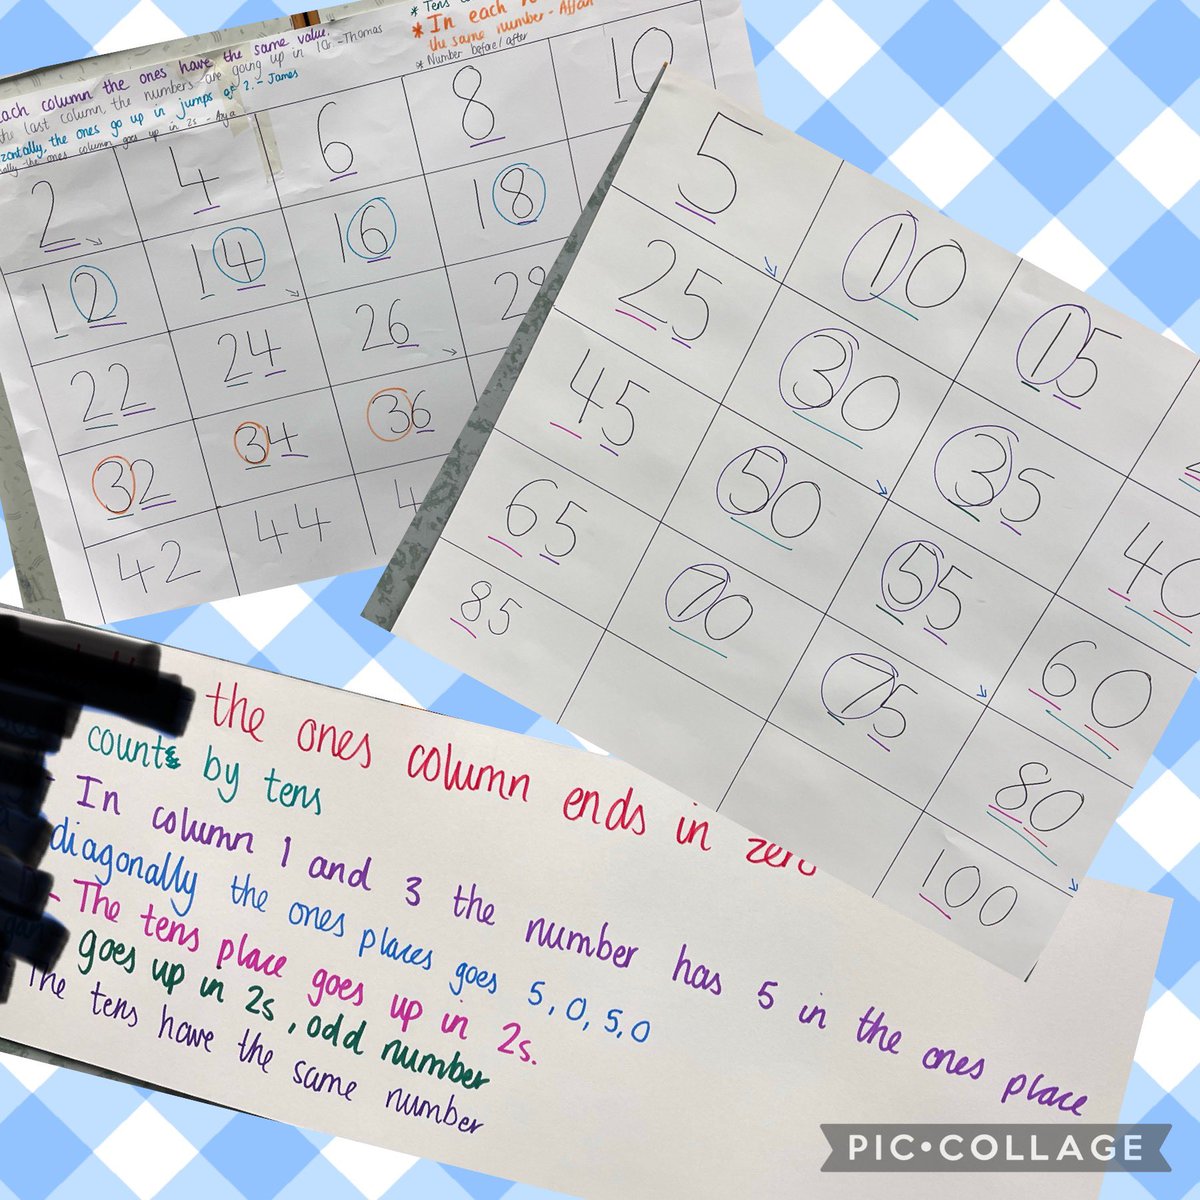 Fantastic discussions with P2 learners @broxburn_ps developing their counting knowledge through Counting Collections and Choral Counting routines - confidently sharing strategies and patterns @WLmaths @WL_Equity